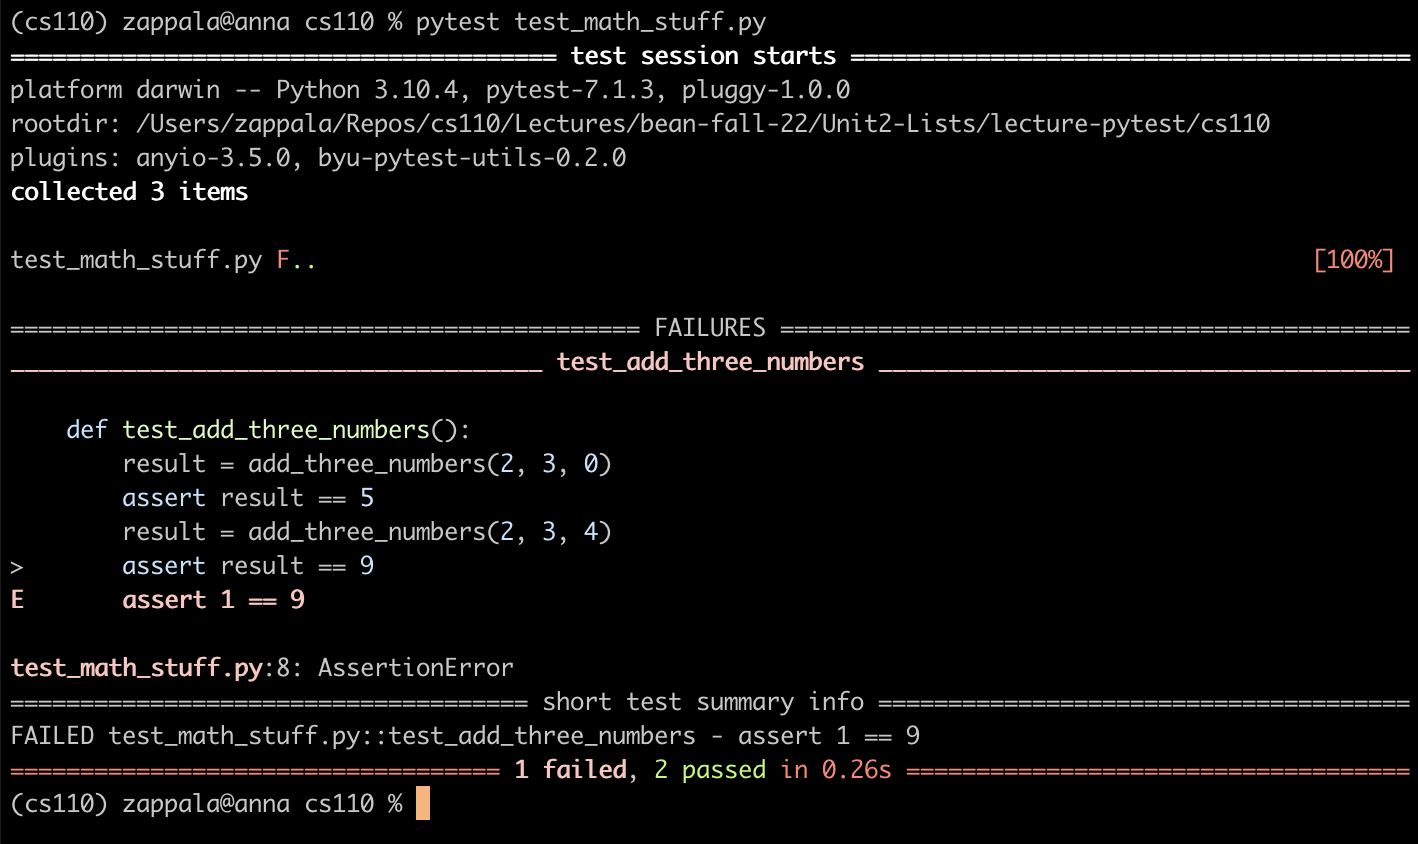 Screenshot showing the output of a failed test when using pytest